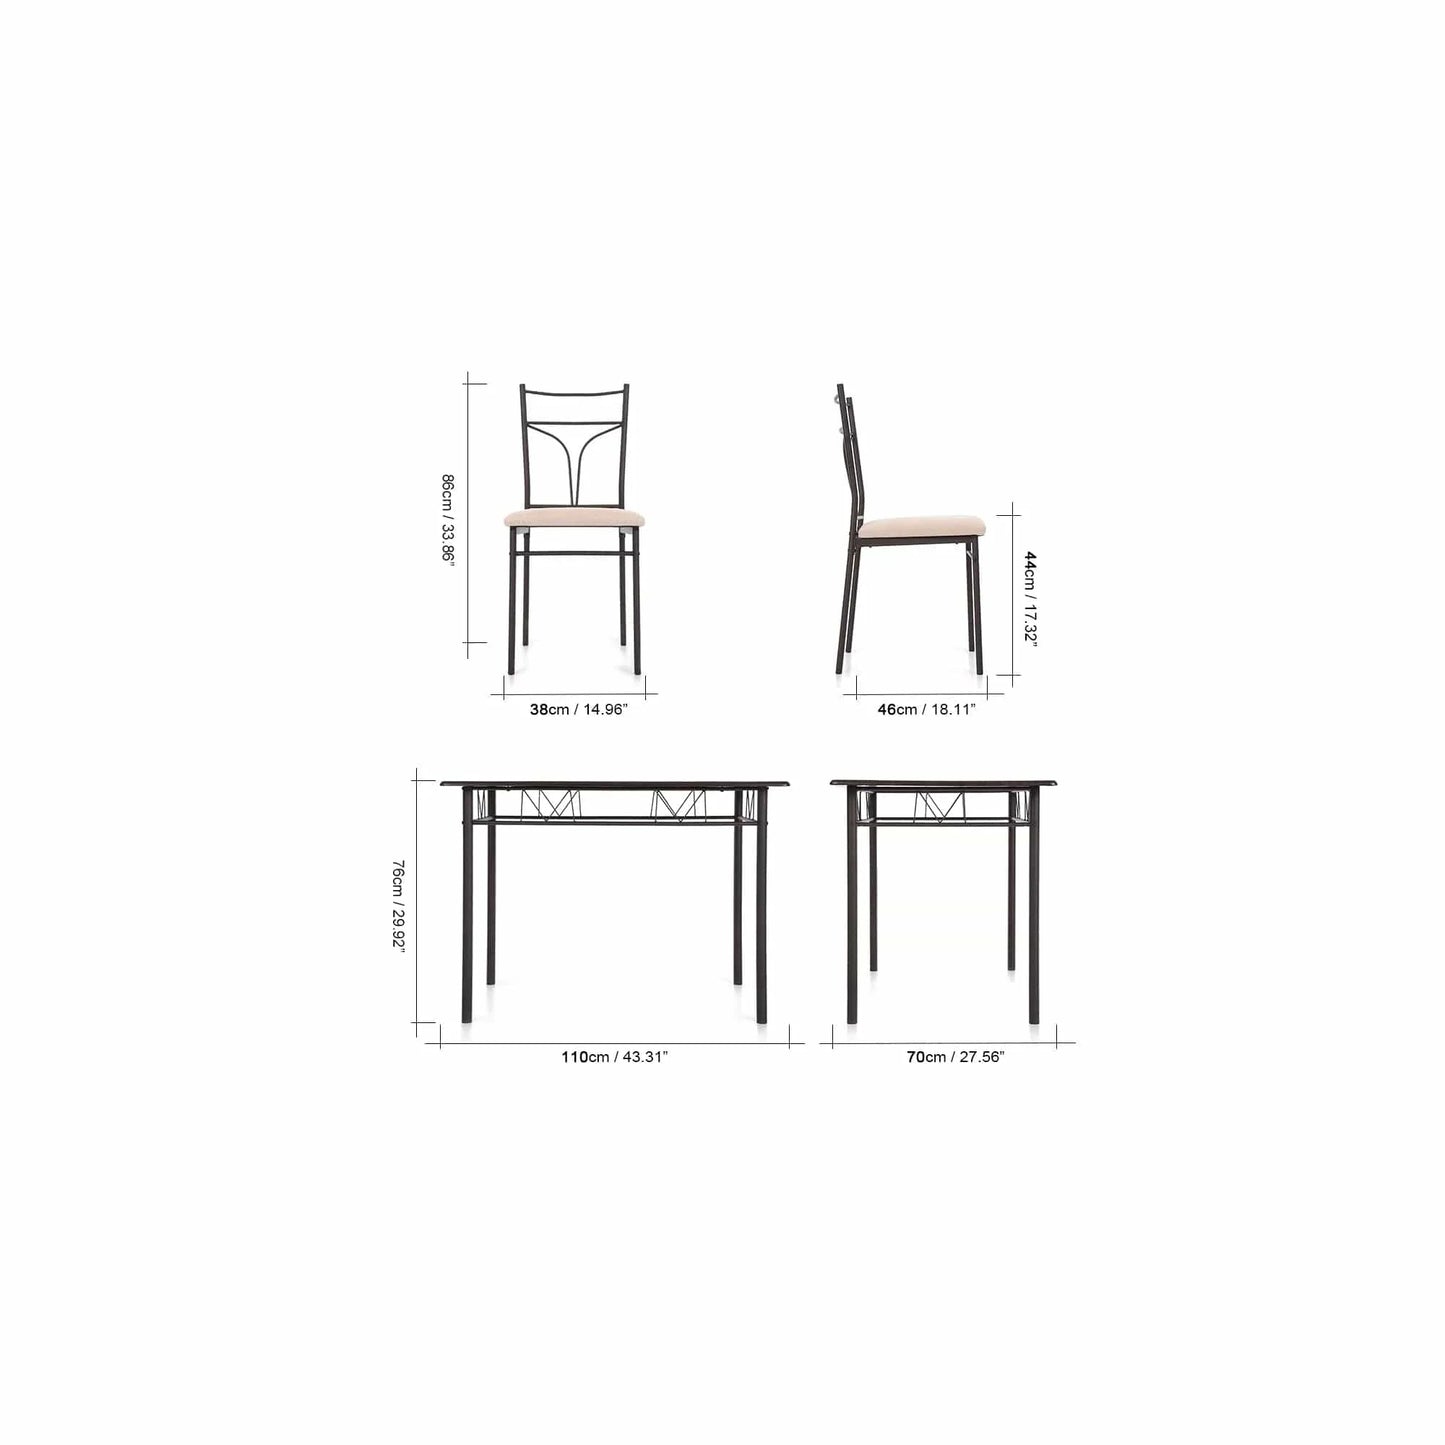 5-Pieces Modern Metal Frame Dining Kitchen Table Chairs Set for 4 Person Kitchen Furniture